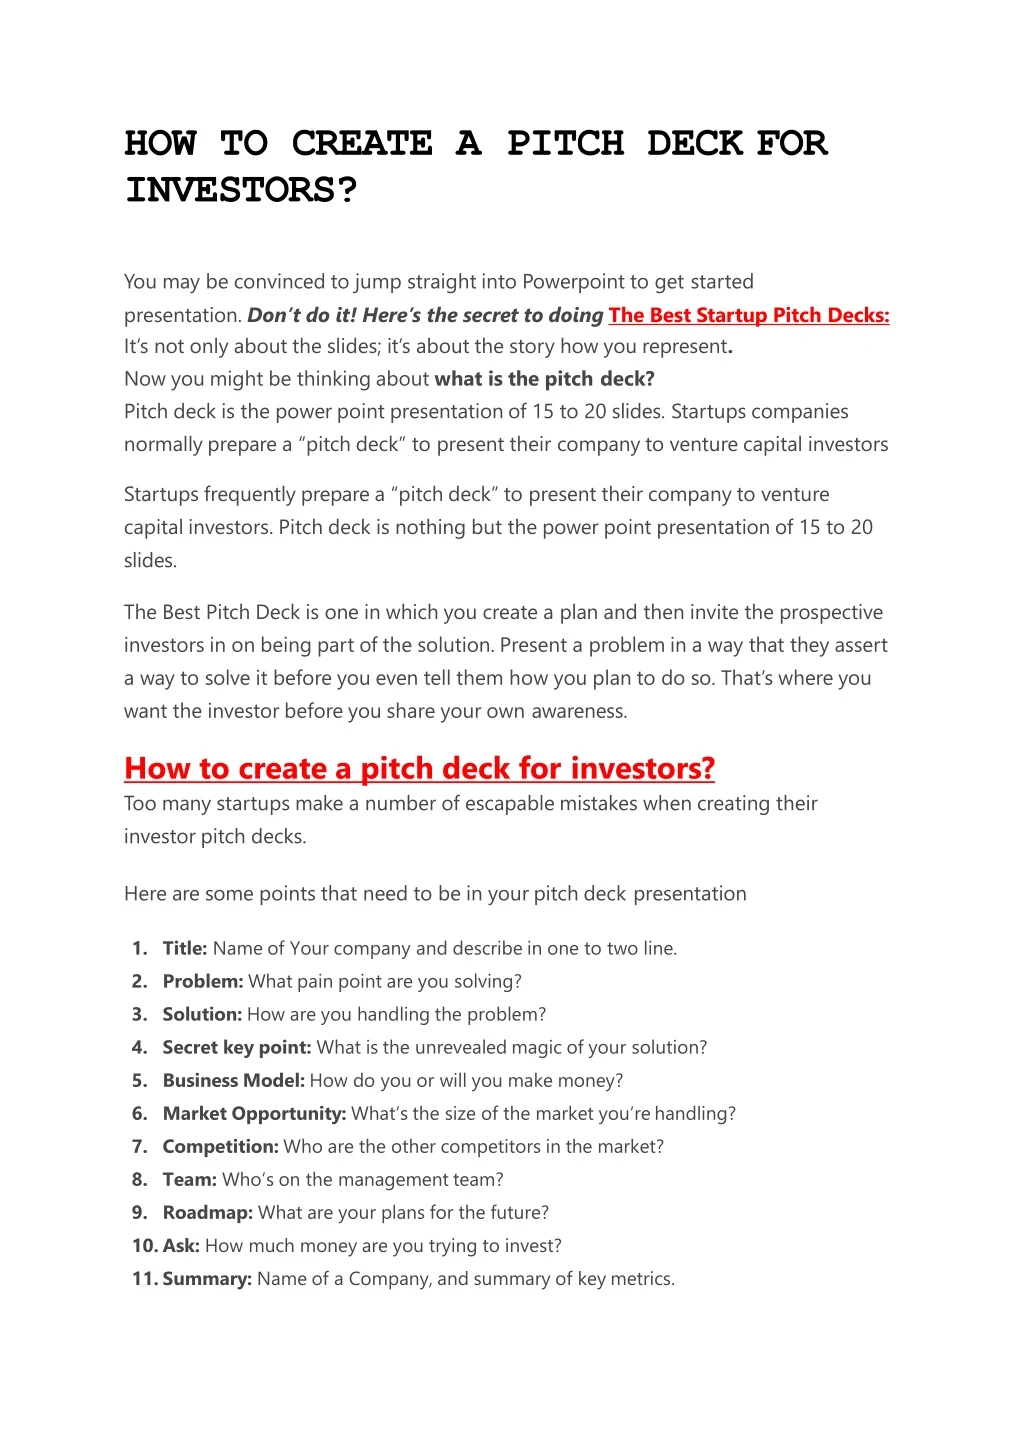 how to create a pitch deck for investors